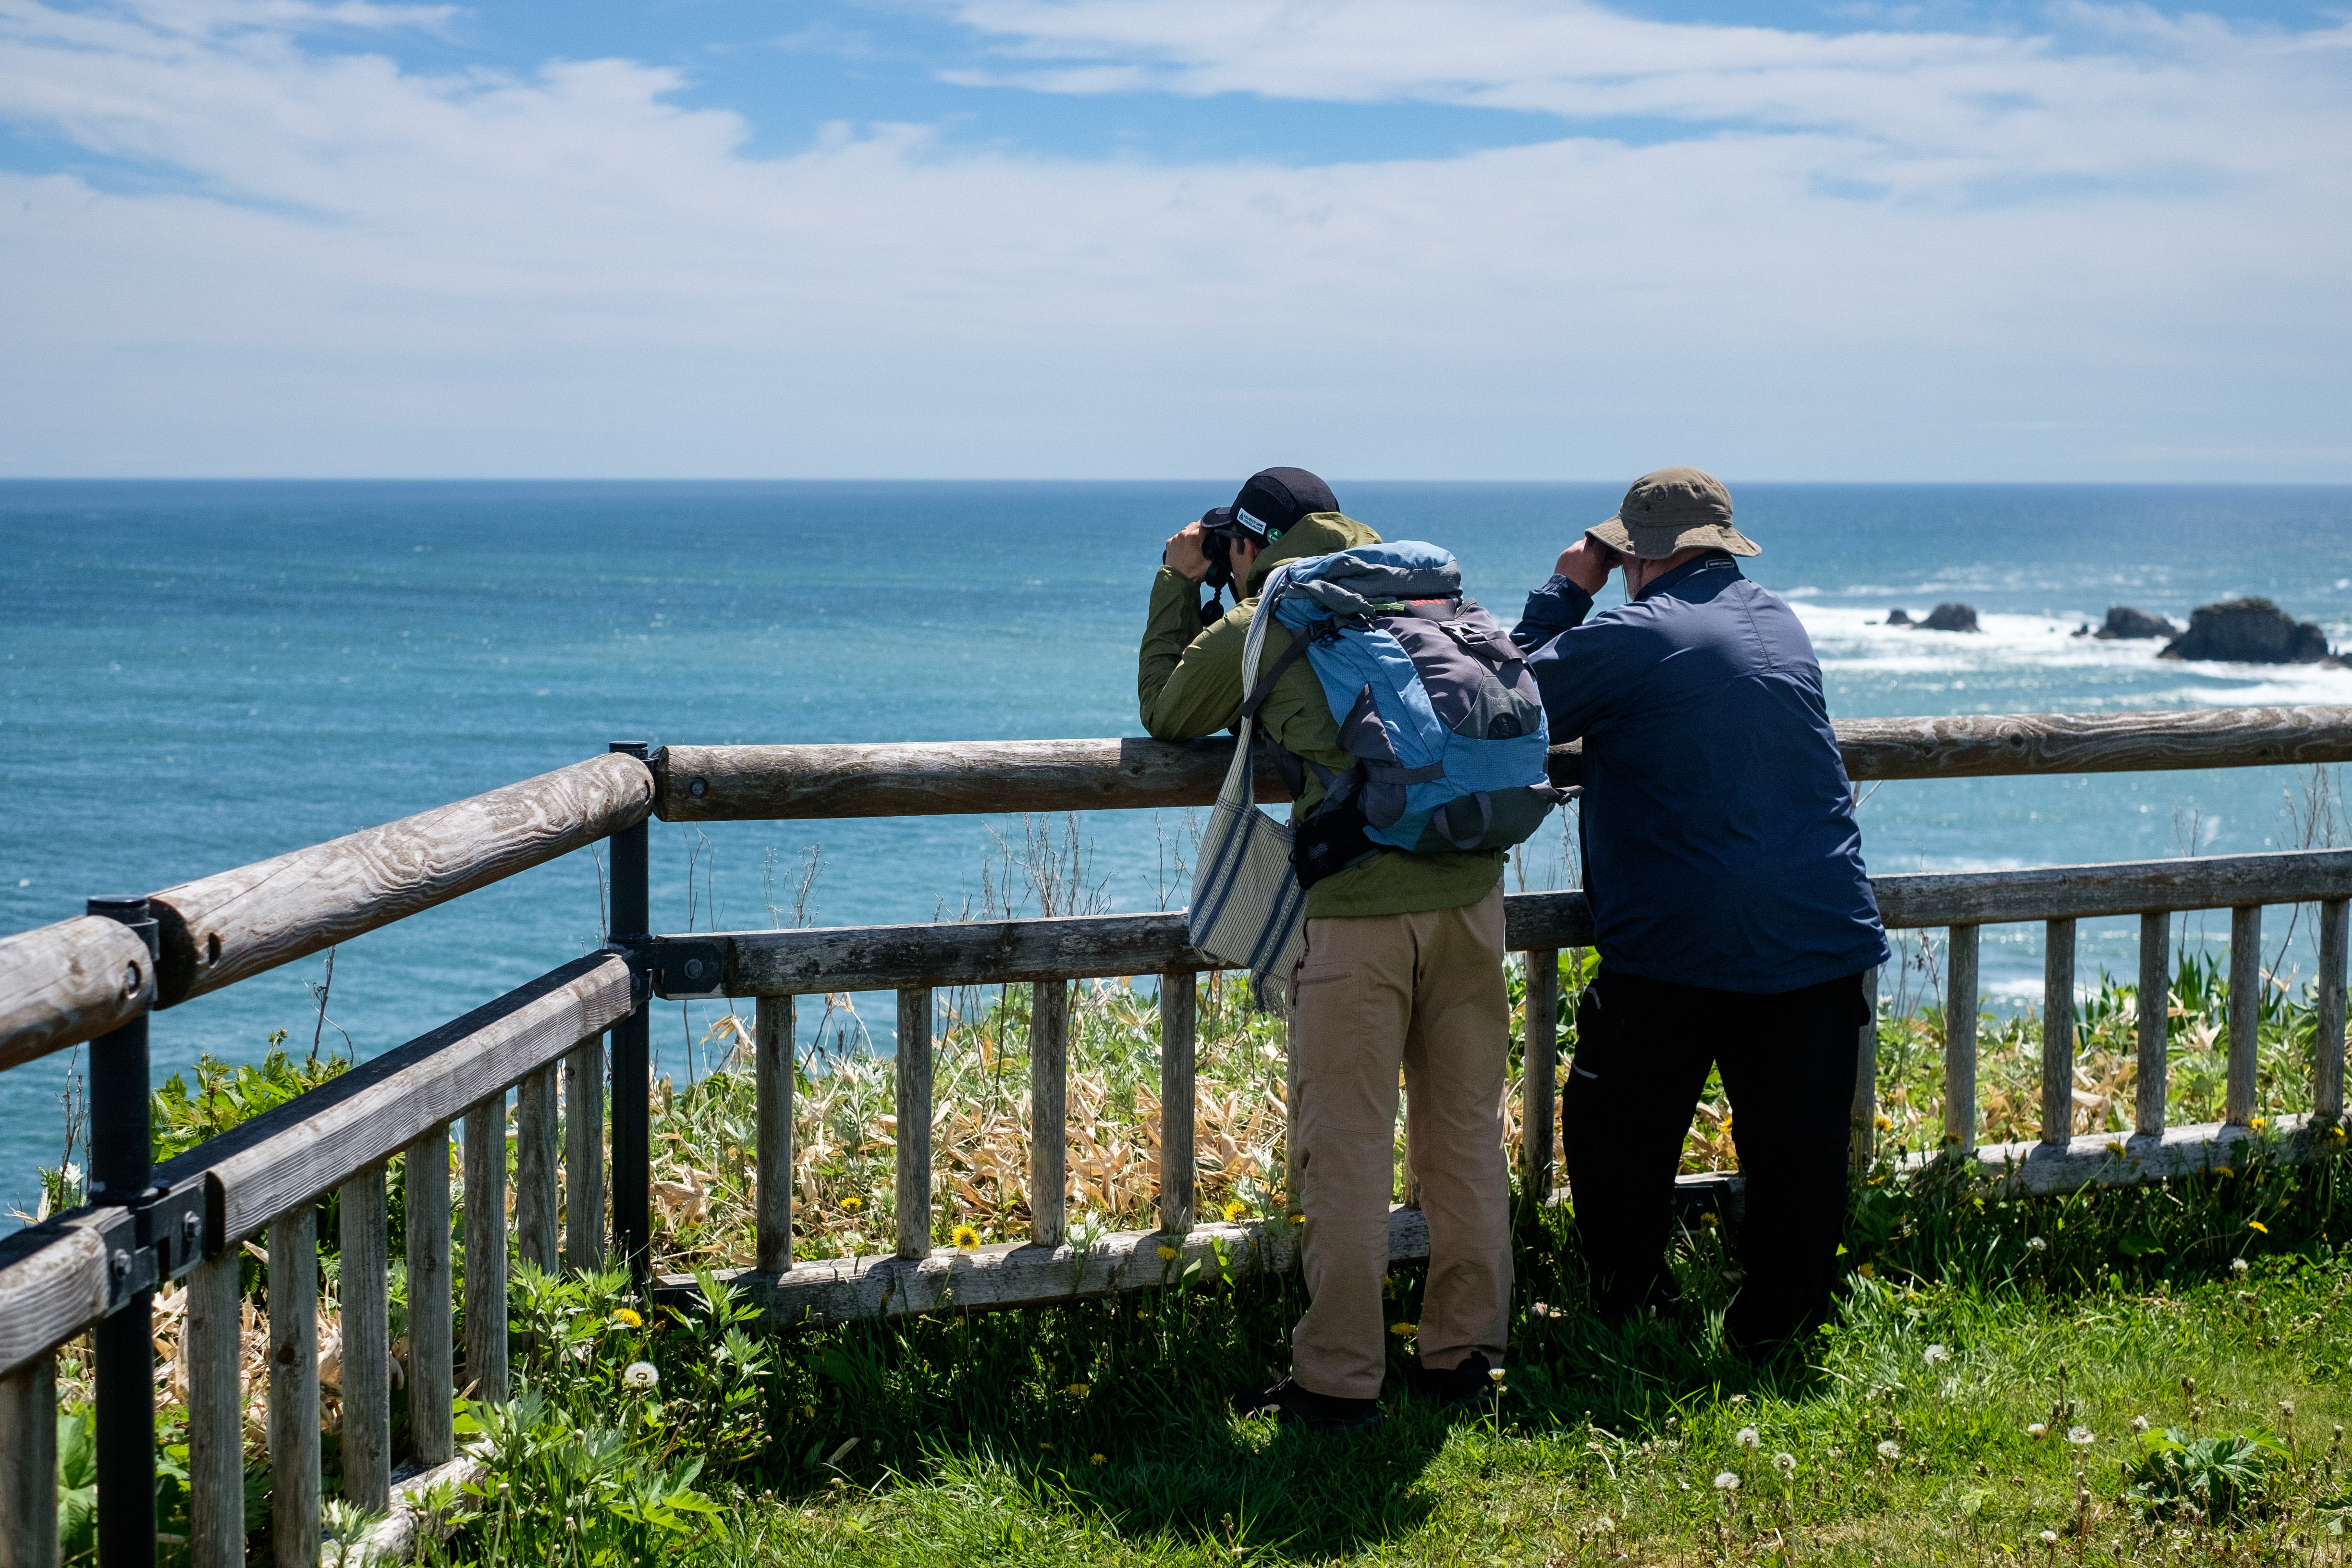 A guide and guest lean on a fence while using binoculars to scan for Sea Otter. The water is turquoise green.